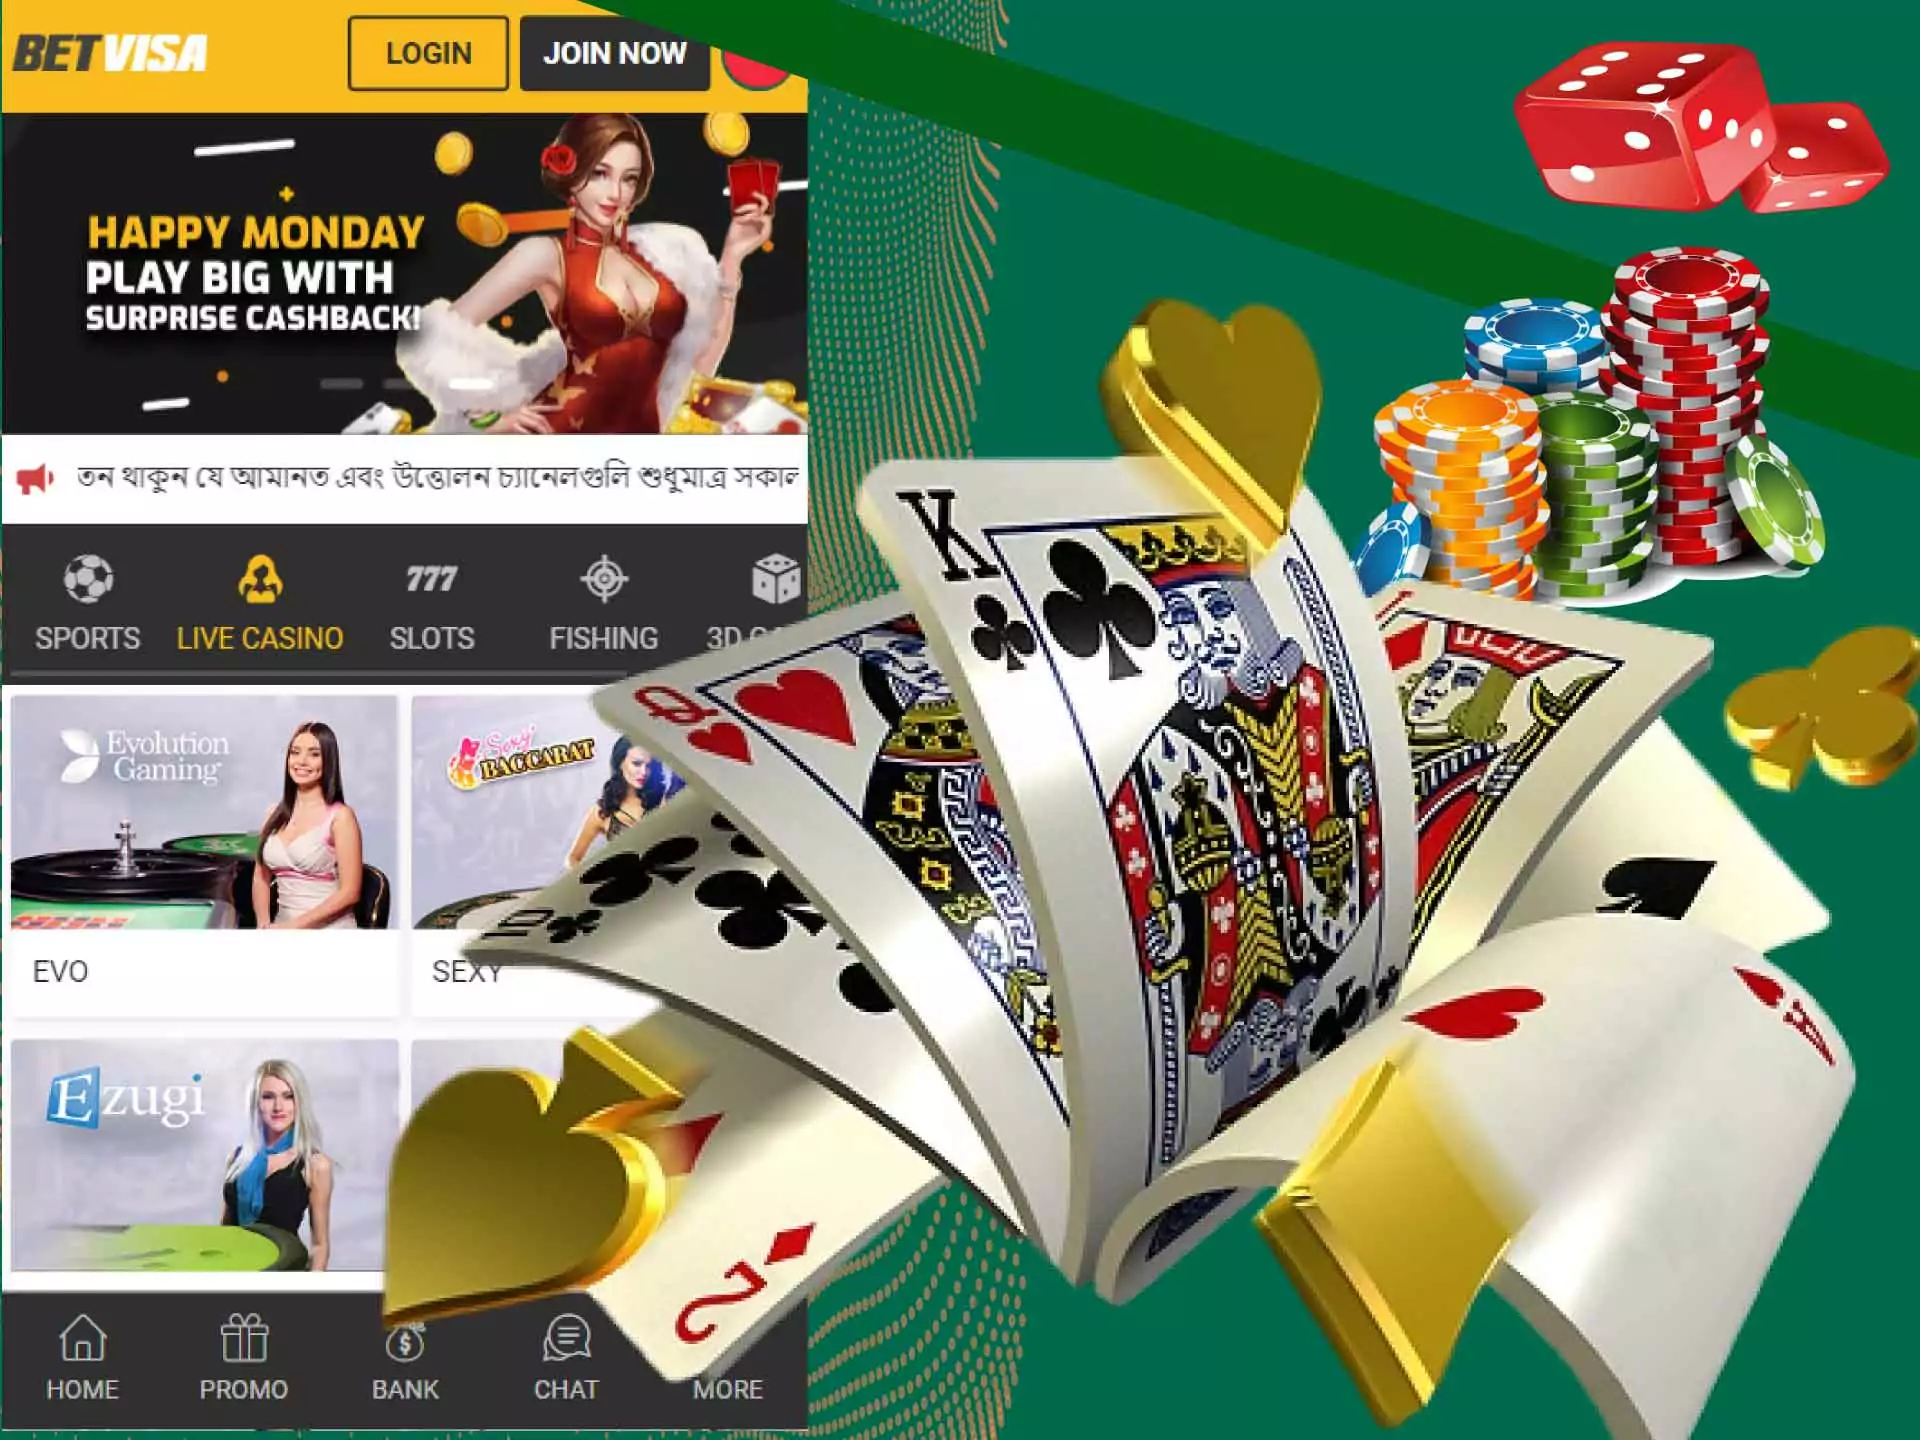 You can find omaha or texas holdem in the BetVisa casino.